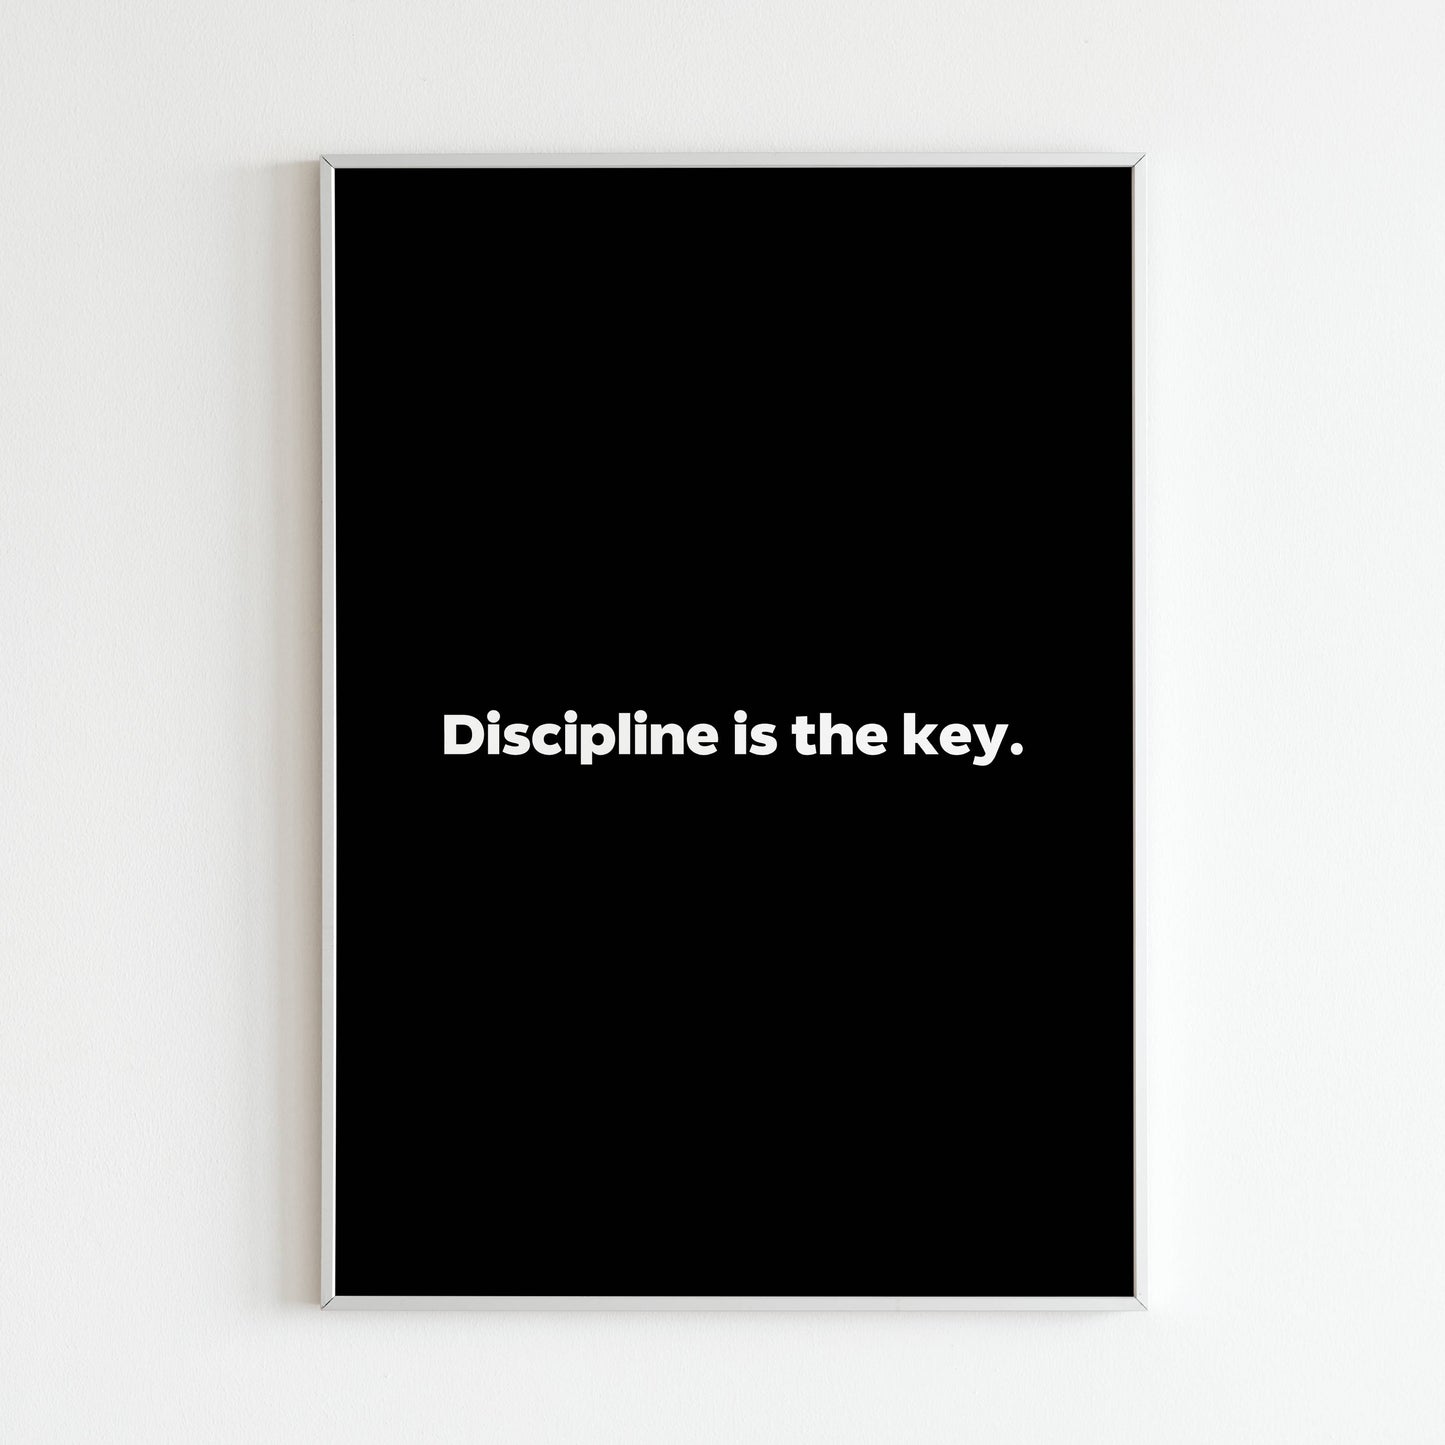 Printable discipline quote poster - Uplifting typography art with a message of self-control.